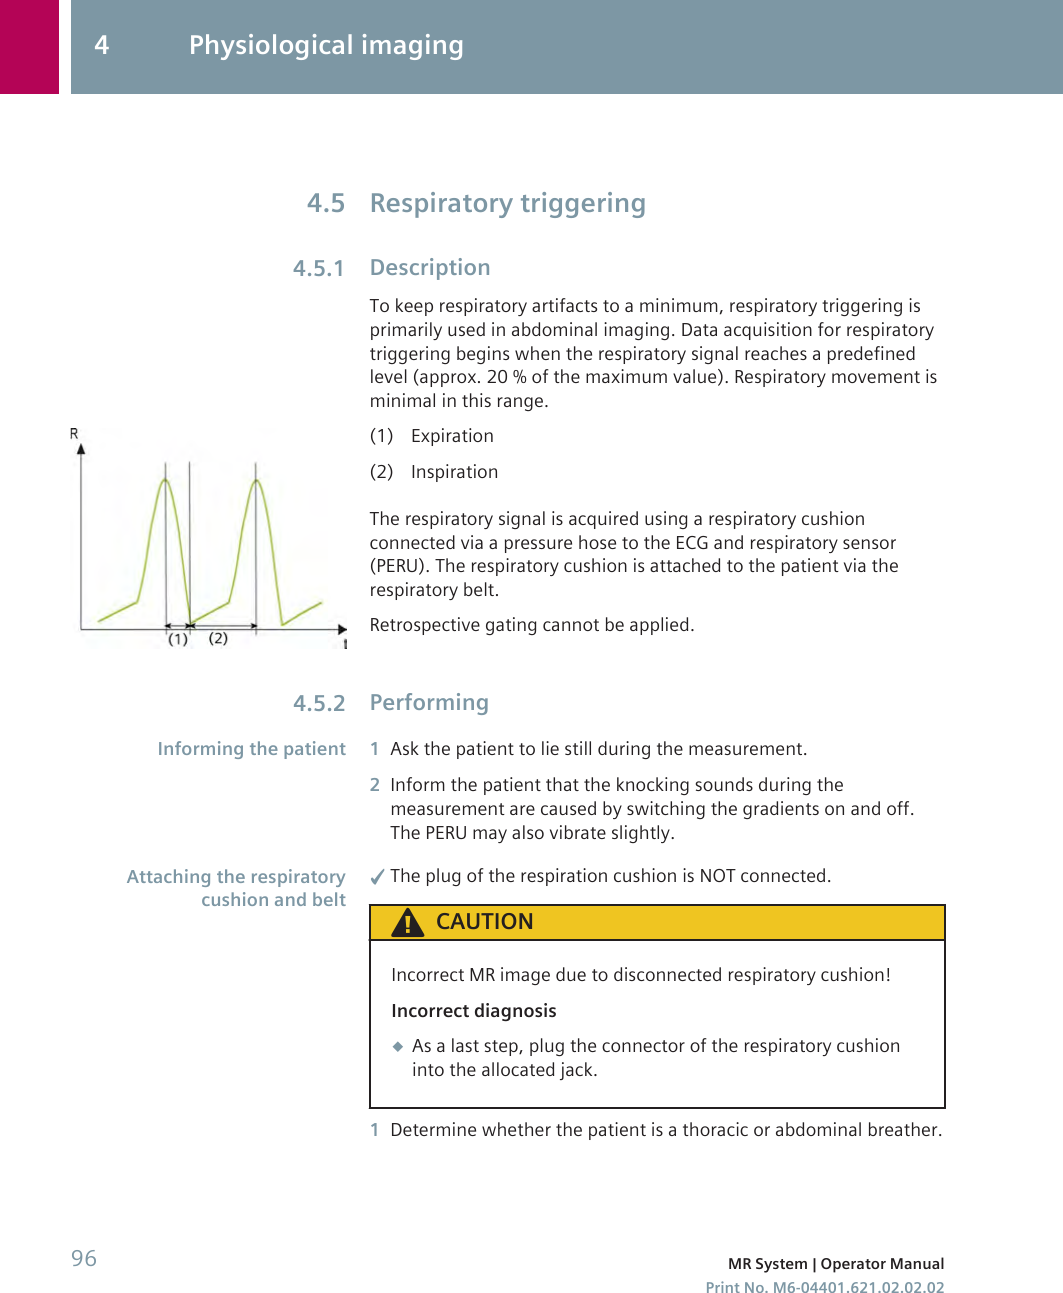 Respiratory triggeringDescriptionTo keep respiratory artifacts to a minimum, respiratory triggering isprimarily used in abdominal imaging. Data acquisition for respiratorytriggering begins when the respiratory signal reaches a predefinedlevel (approx. 20 % of the maximum value). Respiratory movement isminimal in this range.(1) Expiration(2) InspirationThe respiratory signal is acquired using a respiratory cushionconnected via a pressure hose to the ECG and respiratory sensor(PERU). The respiratory cushion is attached to the patient via therespiratory belt.Retrospective gating cannot be applied.Performing1Ask the patient to lie still during the measurement.2Inform the patient that the knocking sounds during themeasurement are caused by switching the gradients on and off.The PERU may also vibrate slightly.✓The plug of the respiration cushion is NOT connected.CAUTIONIncorrect MR image due to disconnected respiratory cushion!Incorrect diagnosis◆As a last step, plug the connector of the respiratory cushioninto the allocated jack.1Determine whether the patient is a thoracic or abdominal breather.4.54.5.14.5.2Informing the patientAttaching the respiratorycushion and belt4 Physiological imaging96 MR System | Operator ManualPrint No. M6-04401.621.02.02.02